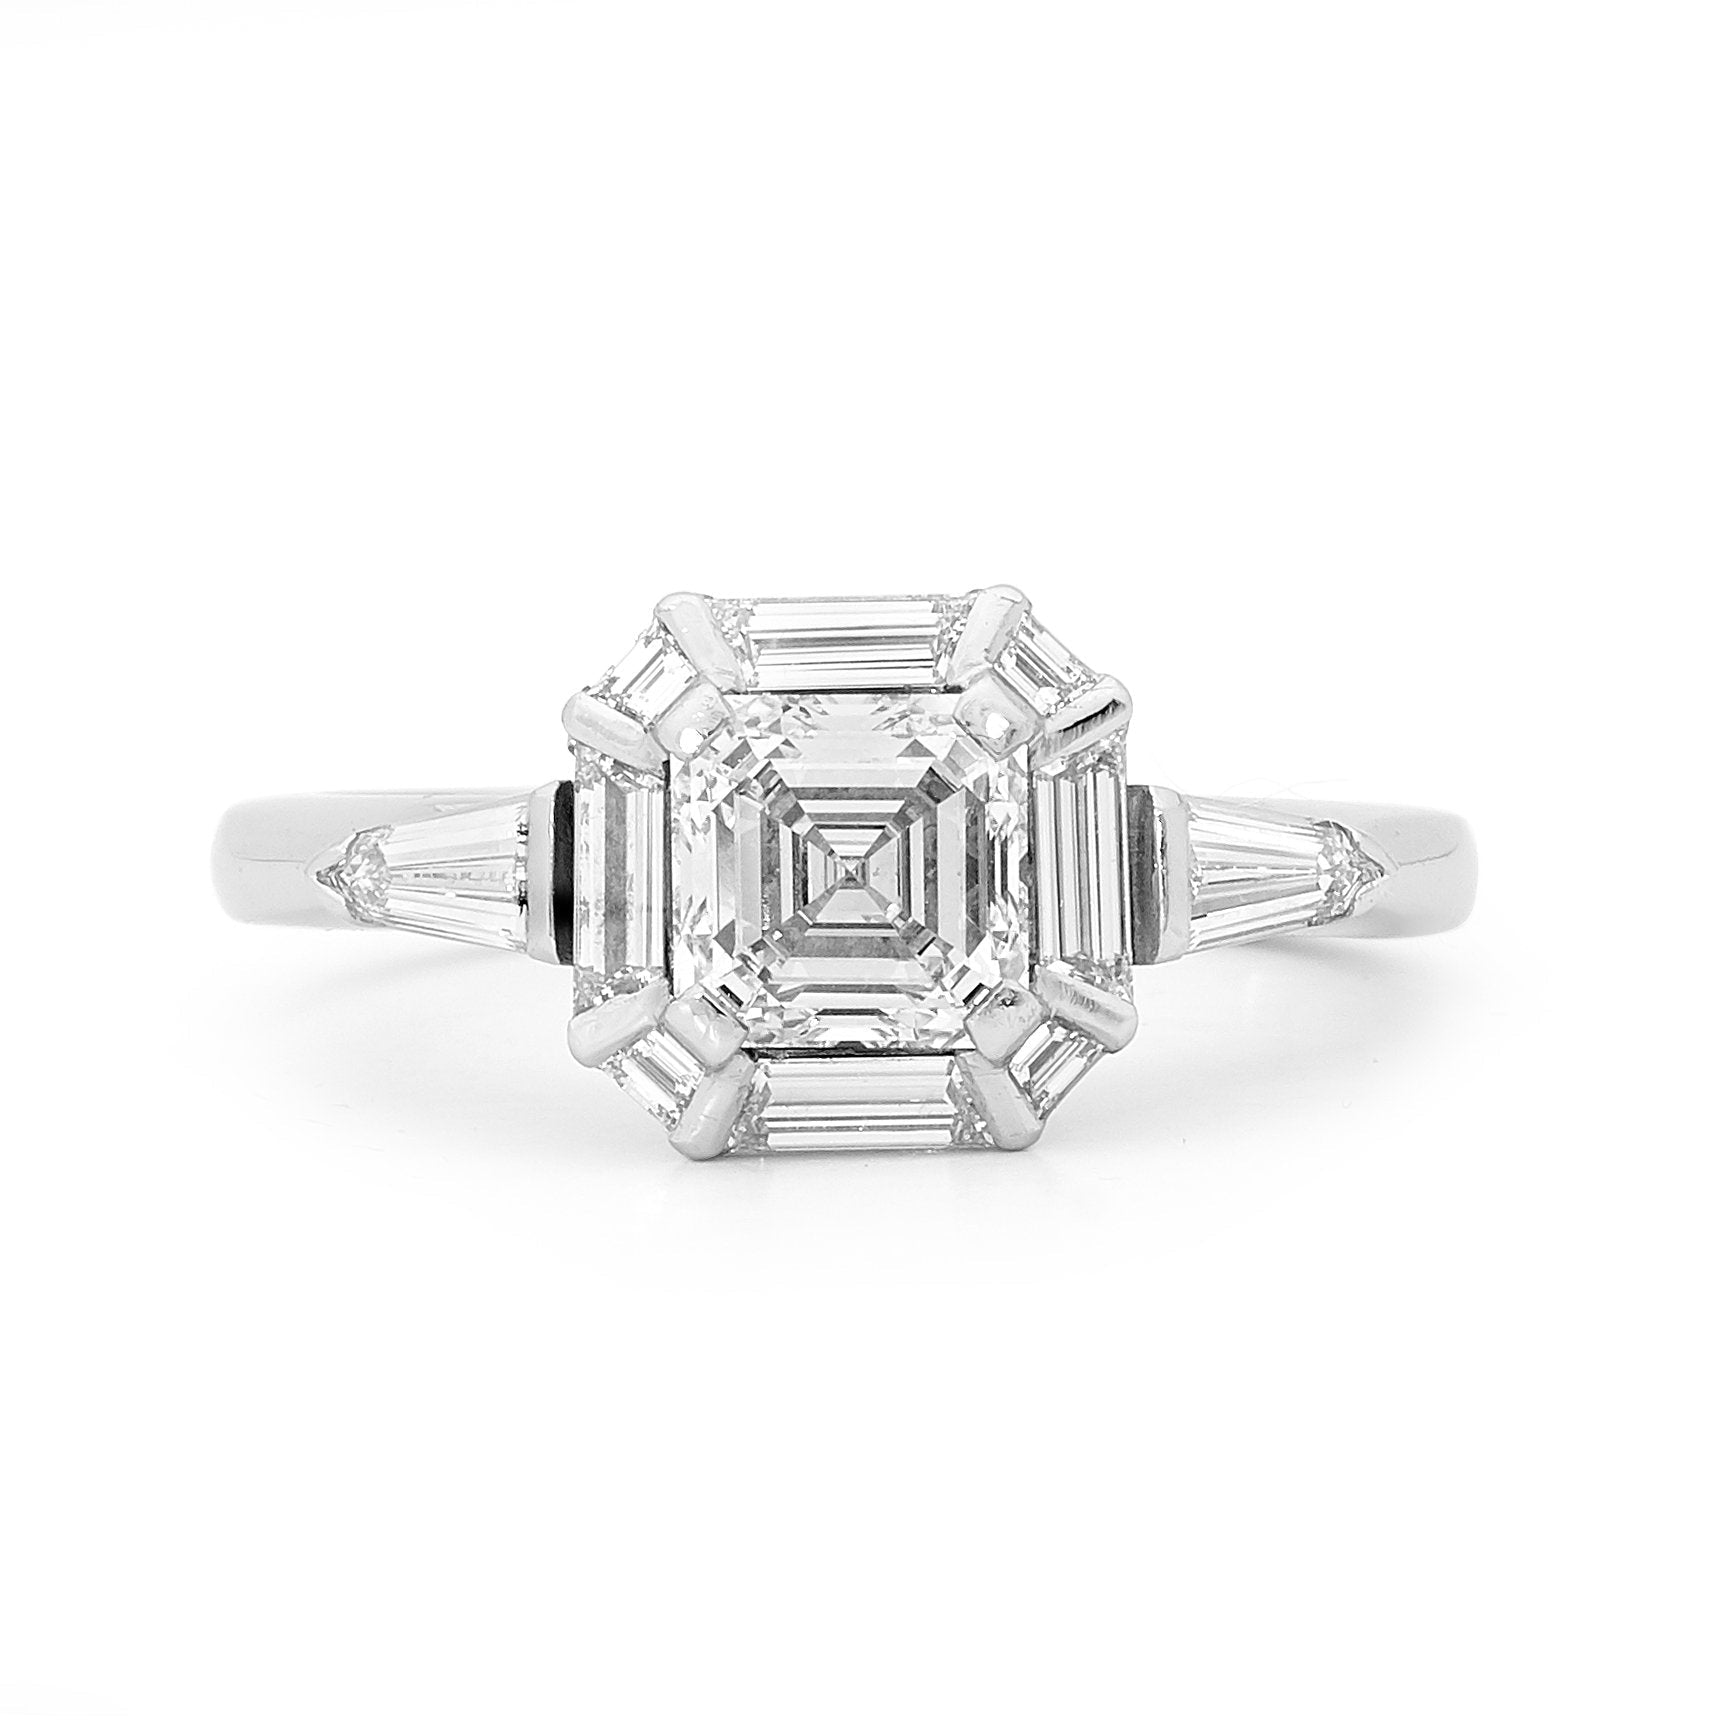 Asscher Cut And Tapered Baguette Diamond Ring - Dominic Walmsley